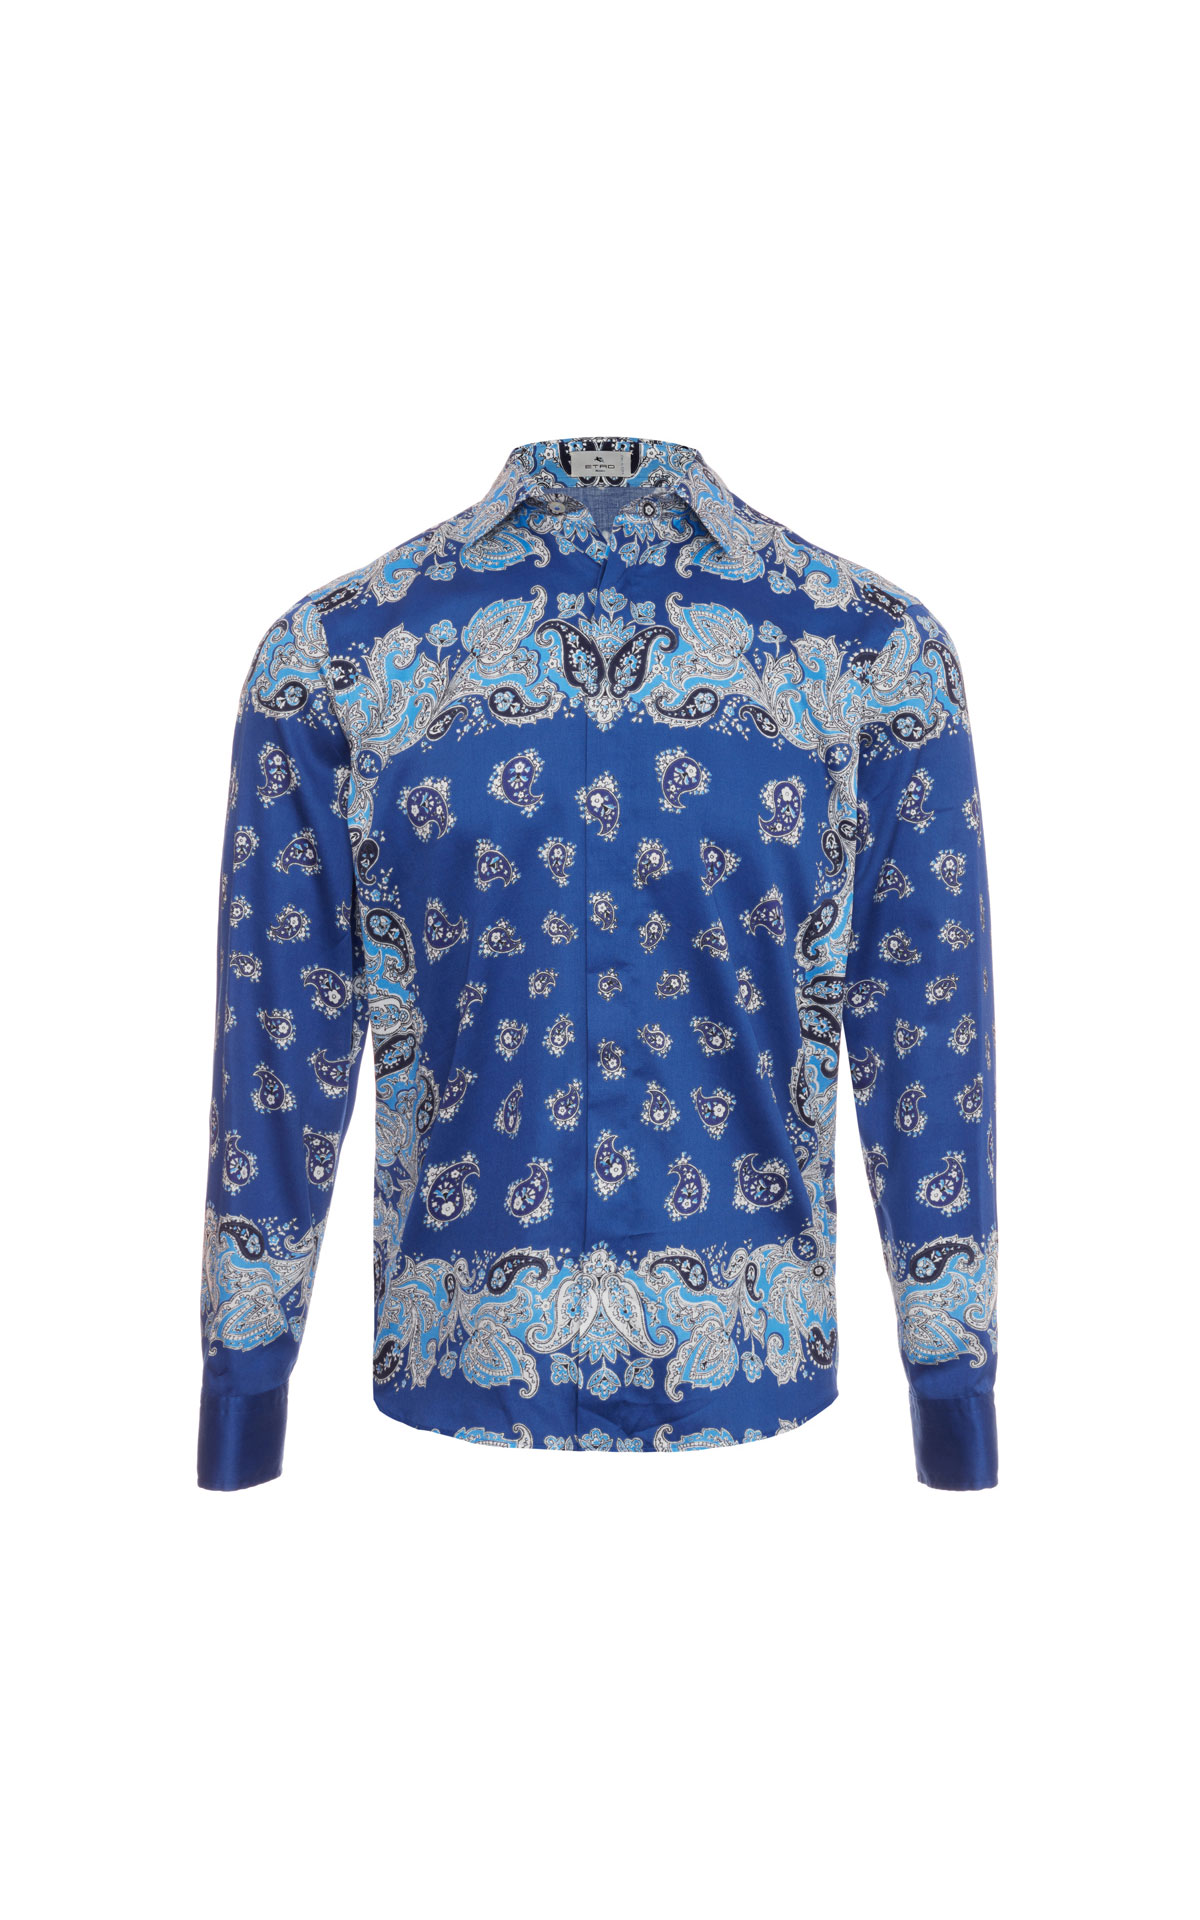 Etro Paisley Shirt from Bicester Village